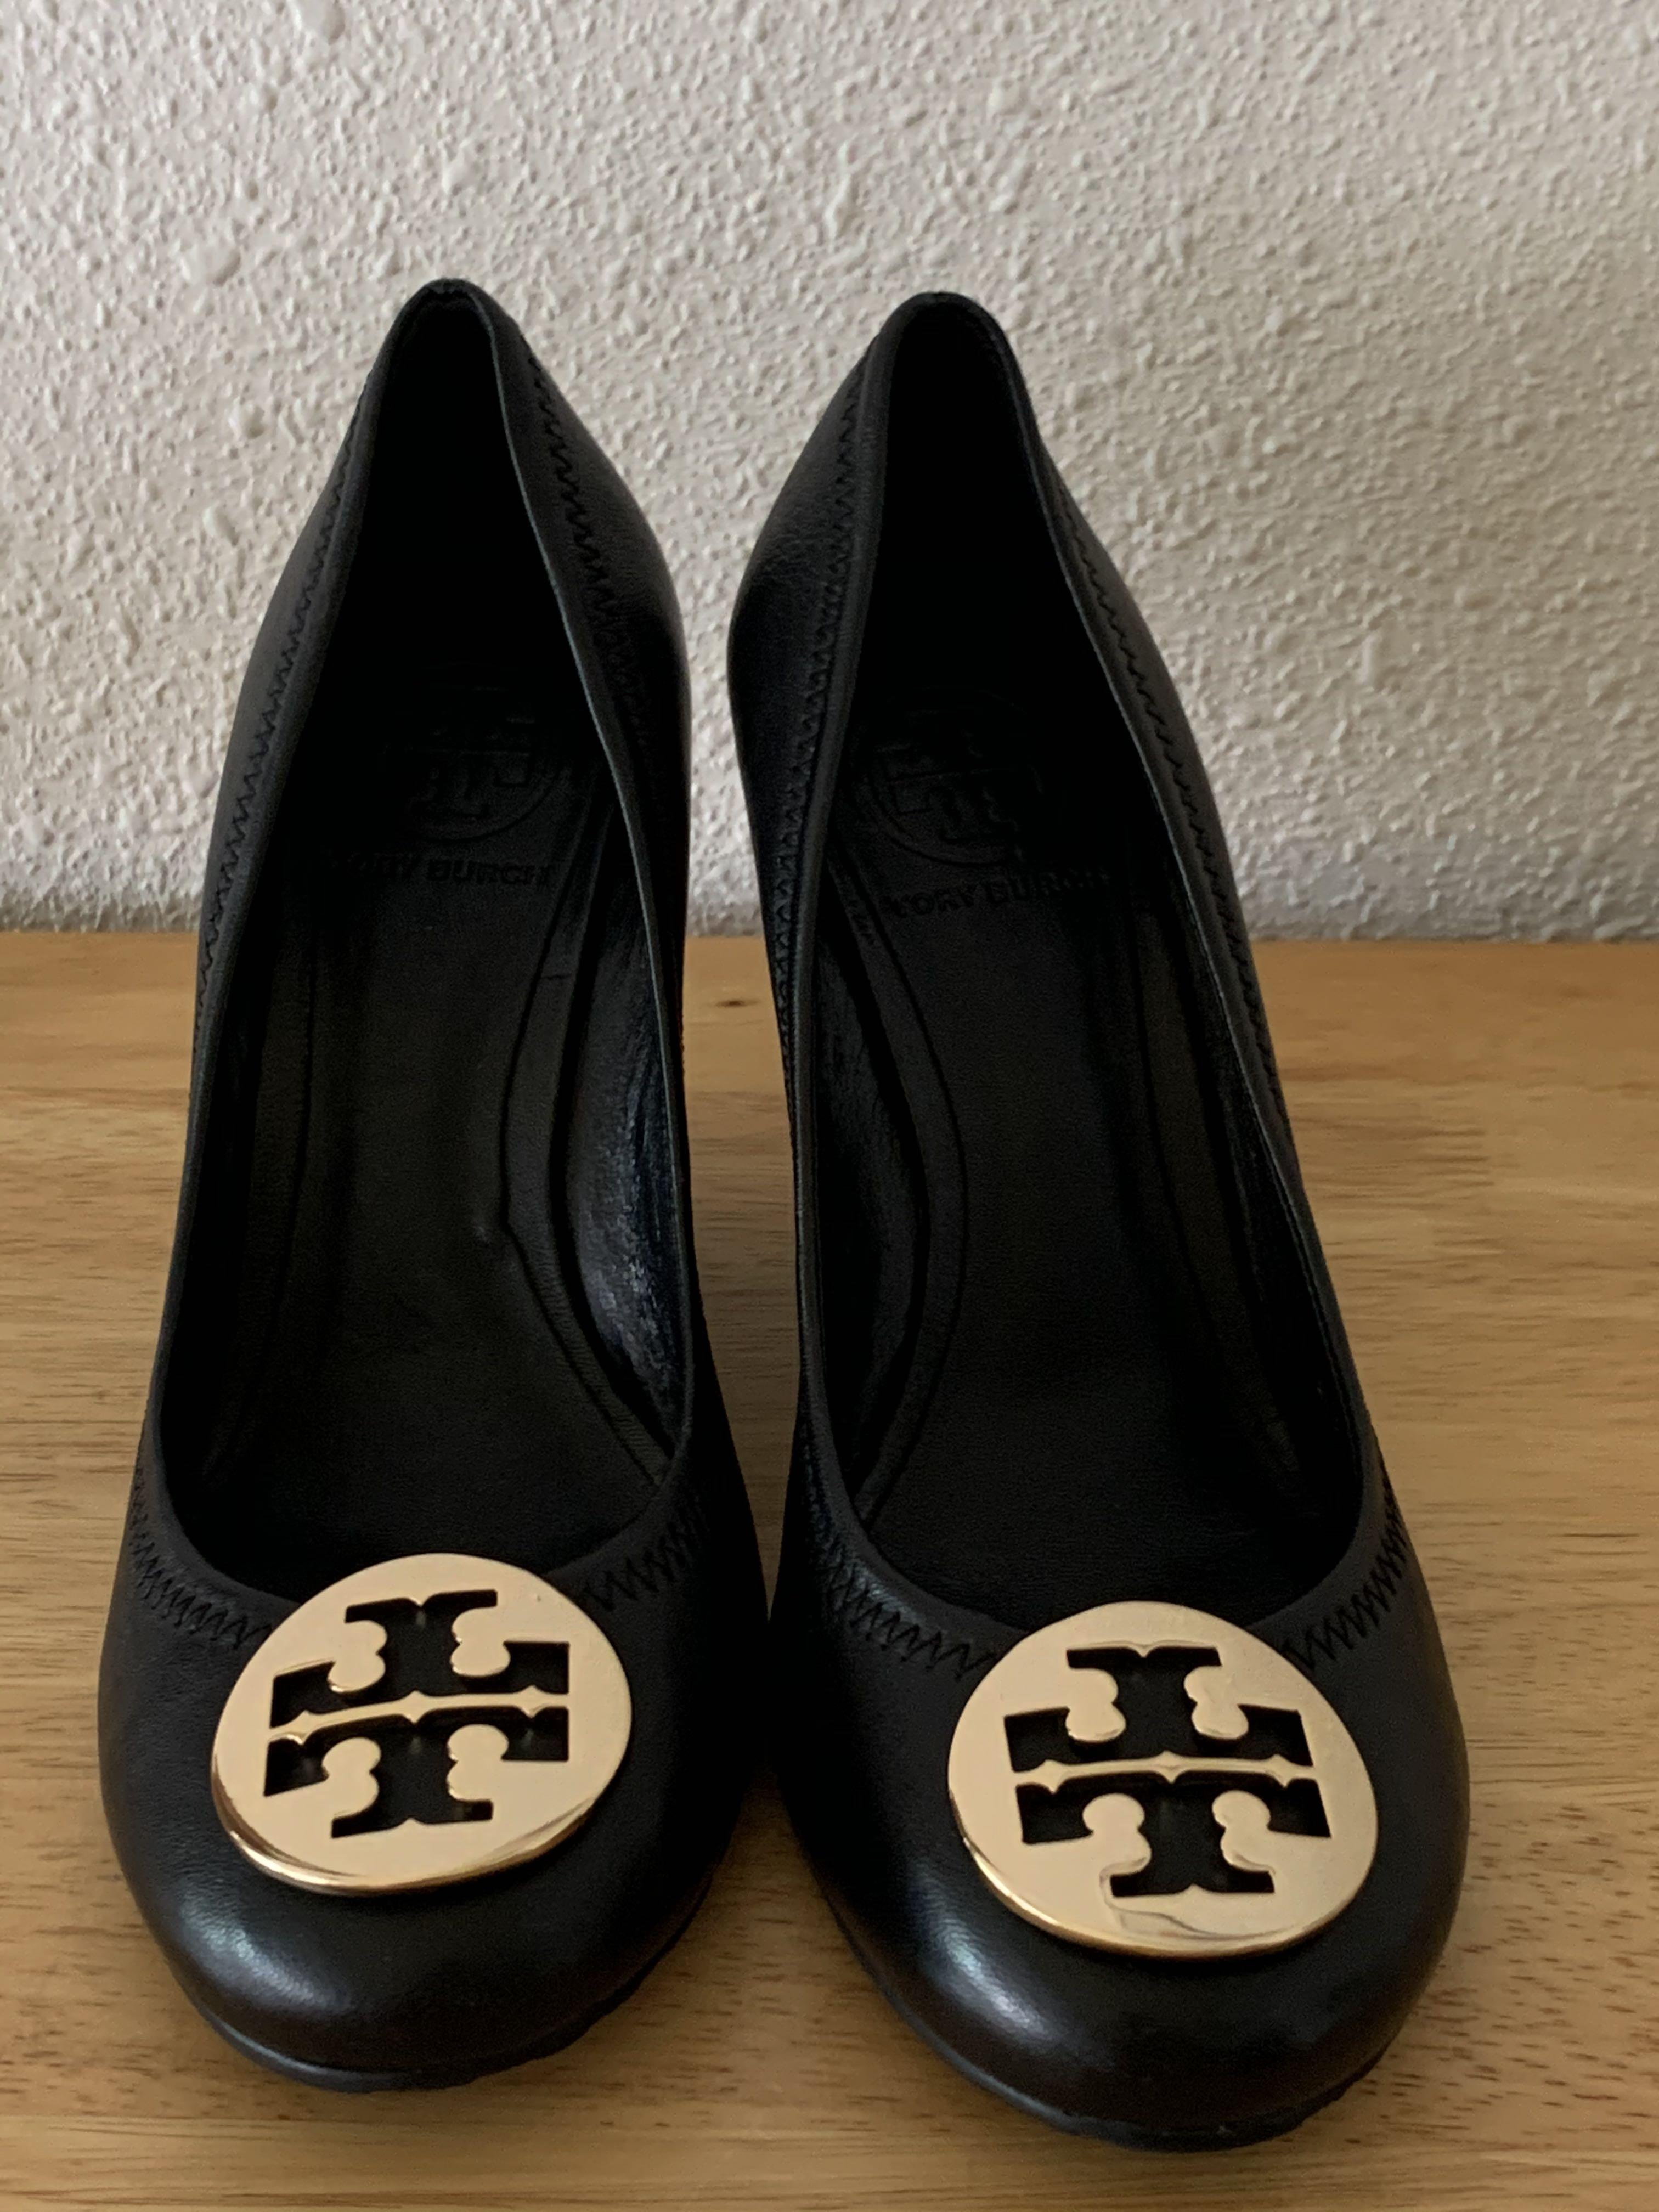 tory burch shoes price